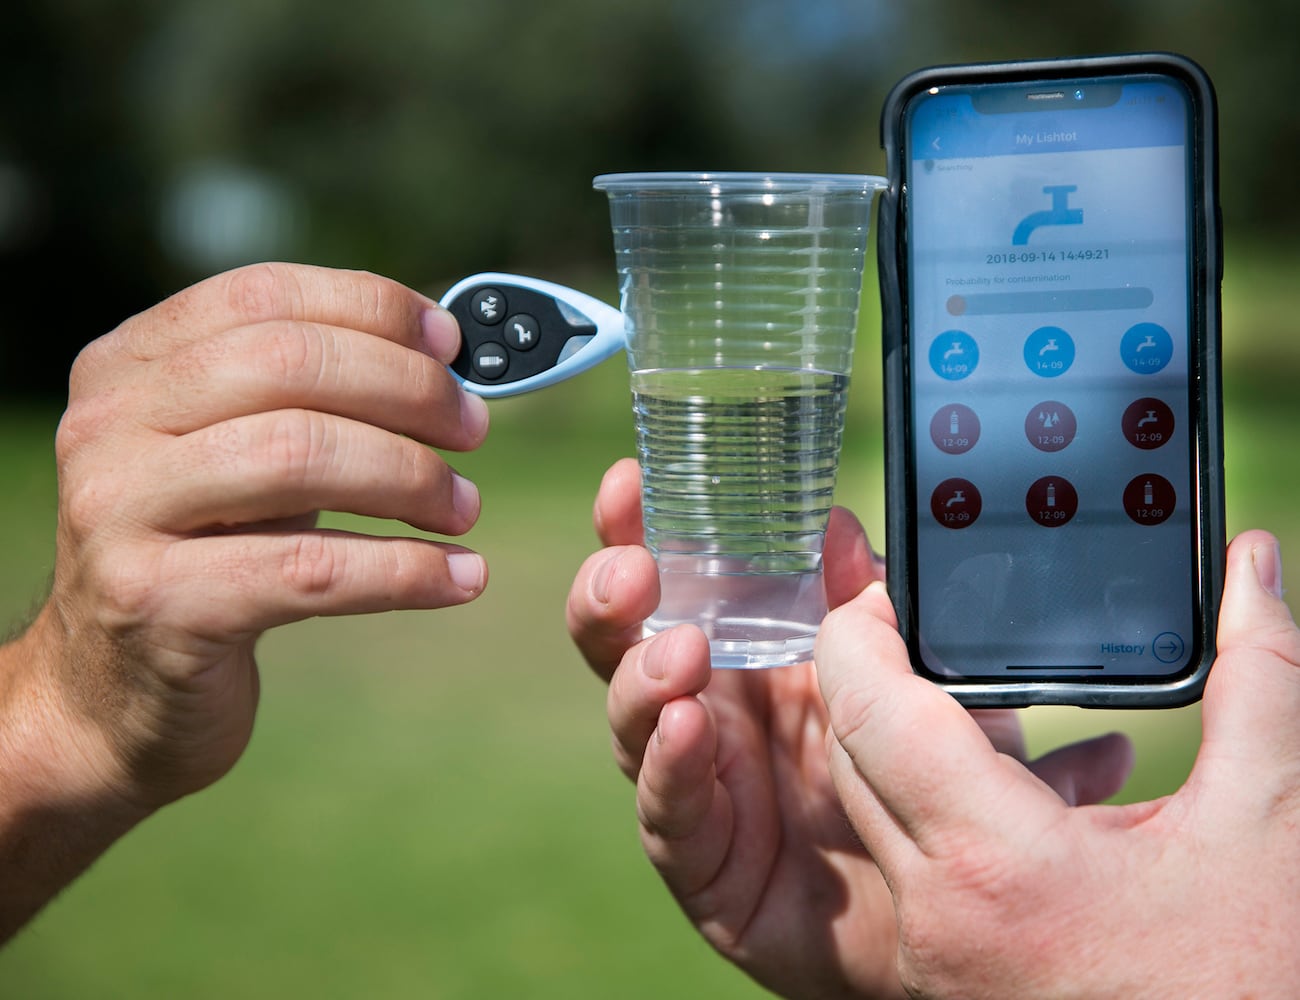 Lishtot TestDrop Pro Instant Water Quality Tester ensures you’re drinking safe water